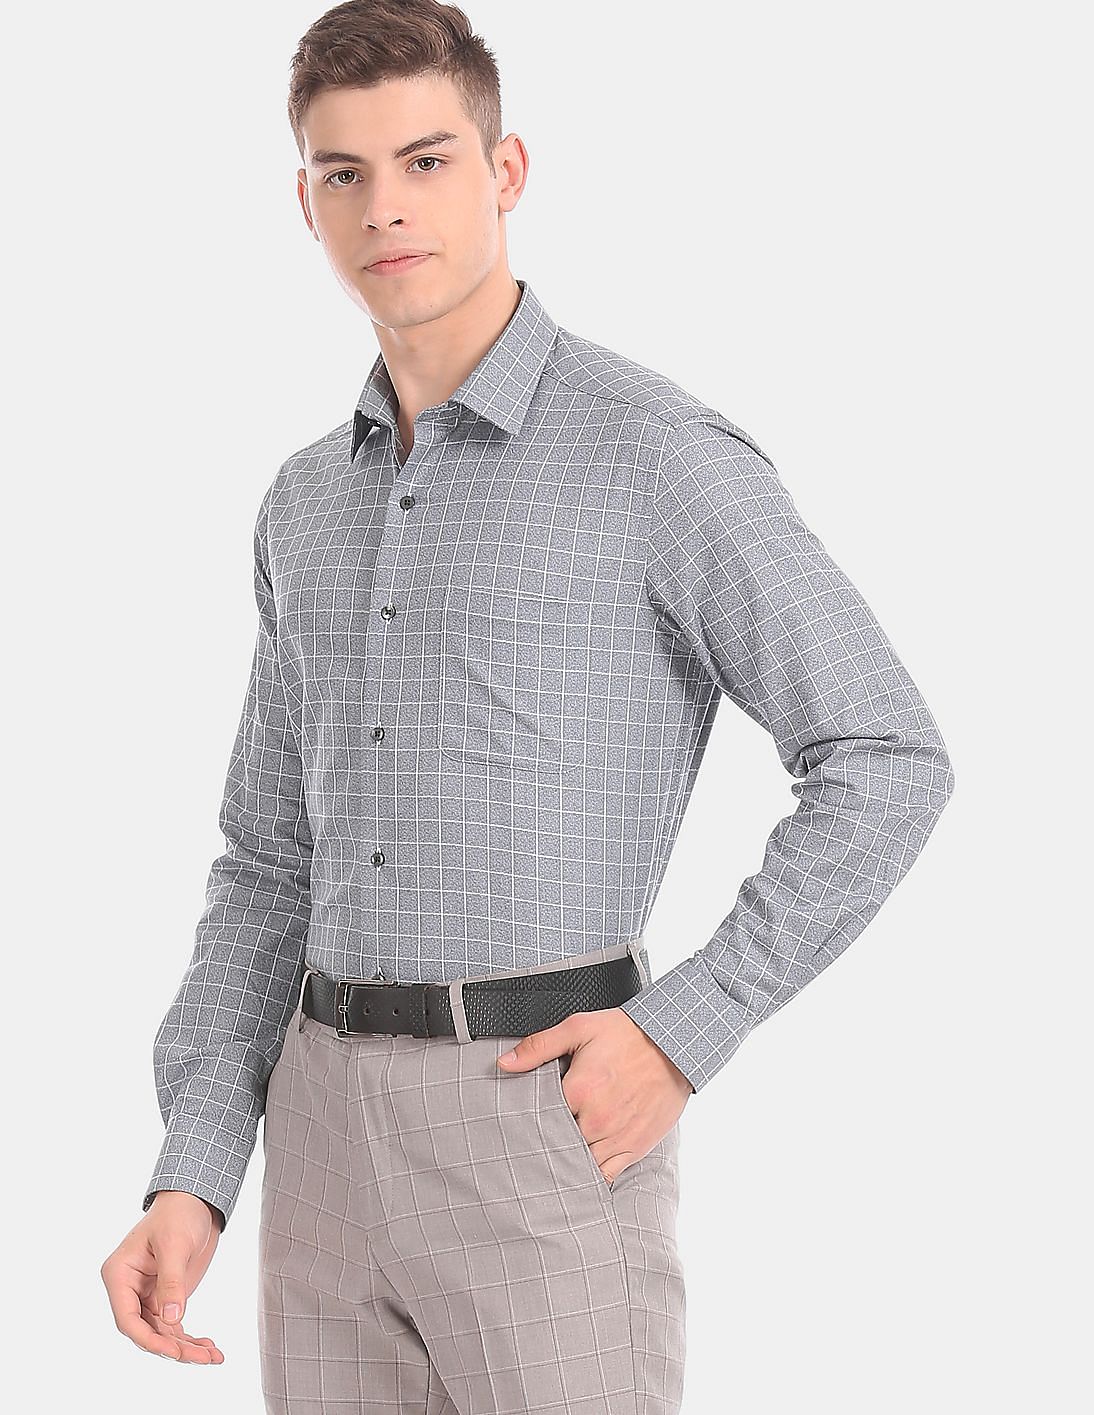 Buy Arrow Slim Fit Rounded Cuff Check Formal Shirt - NNNOW.com